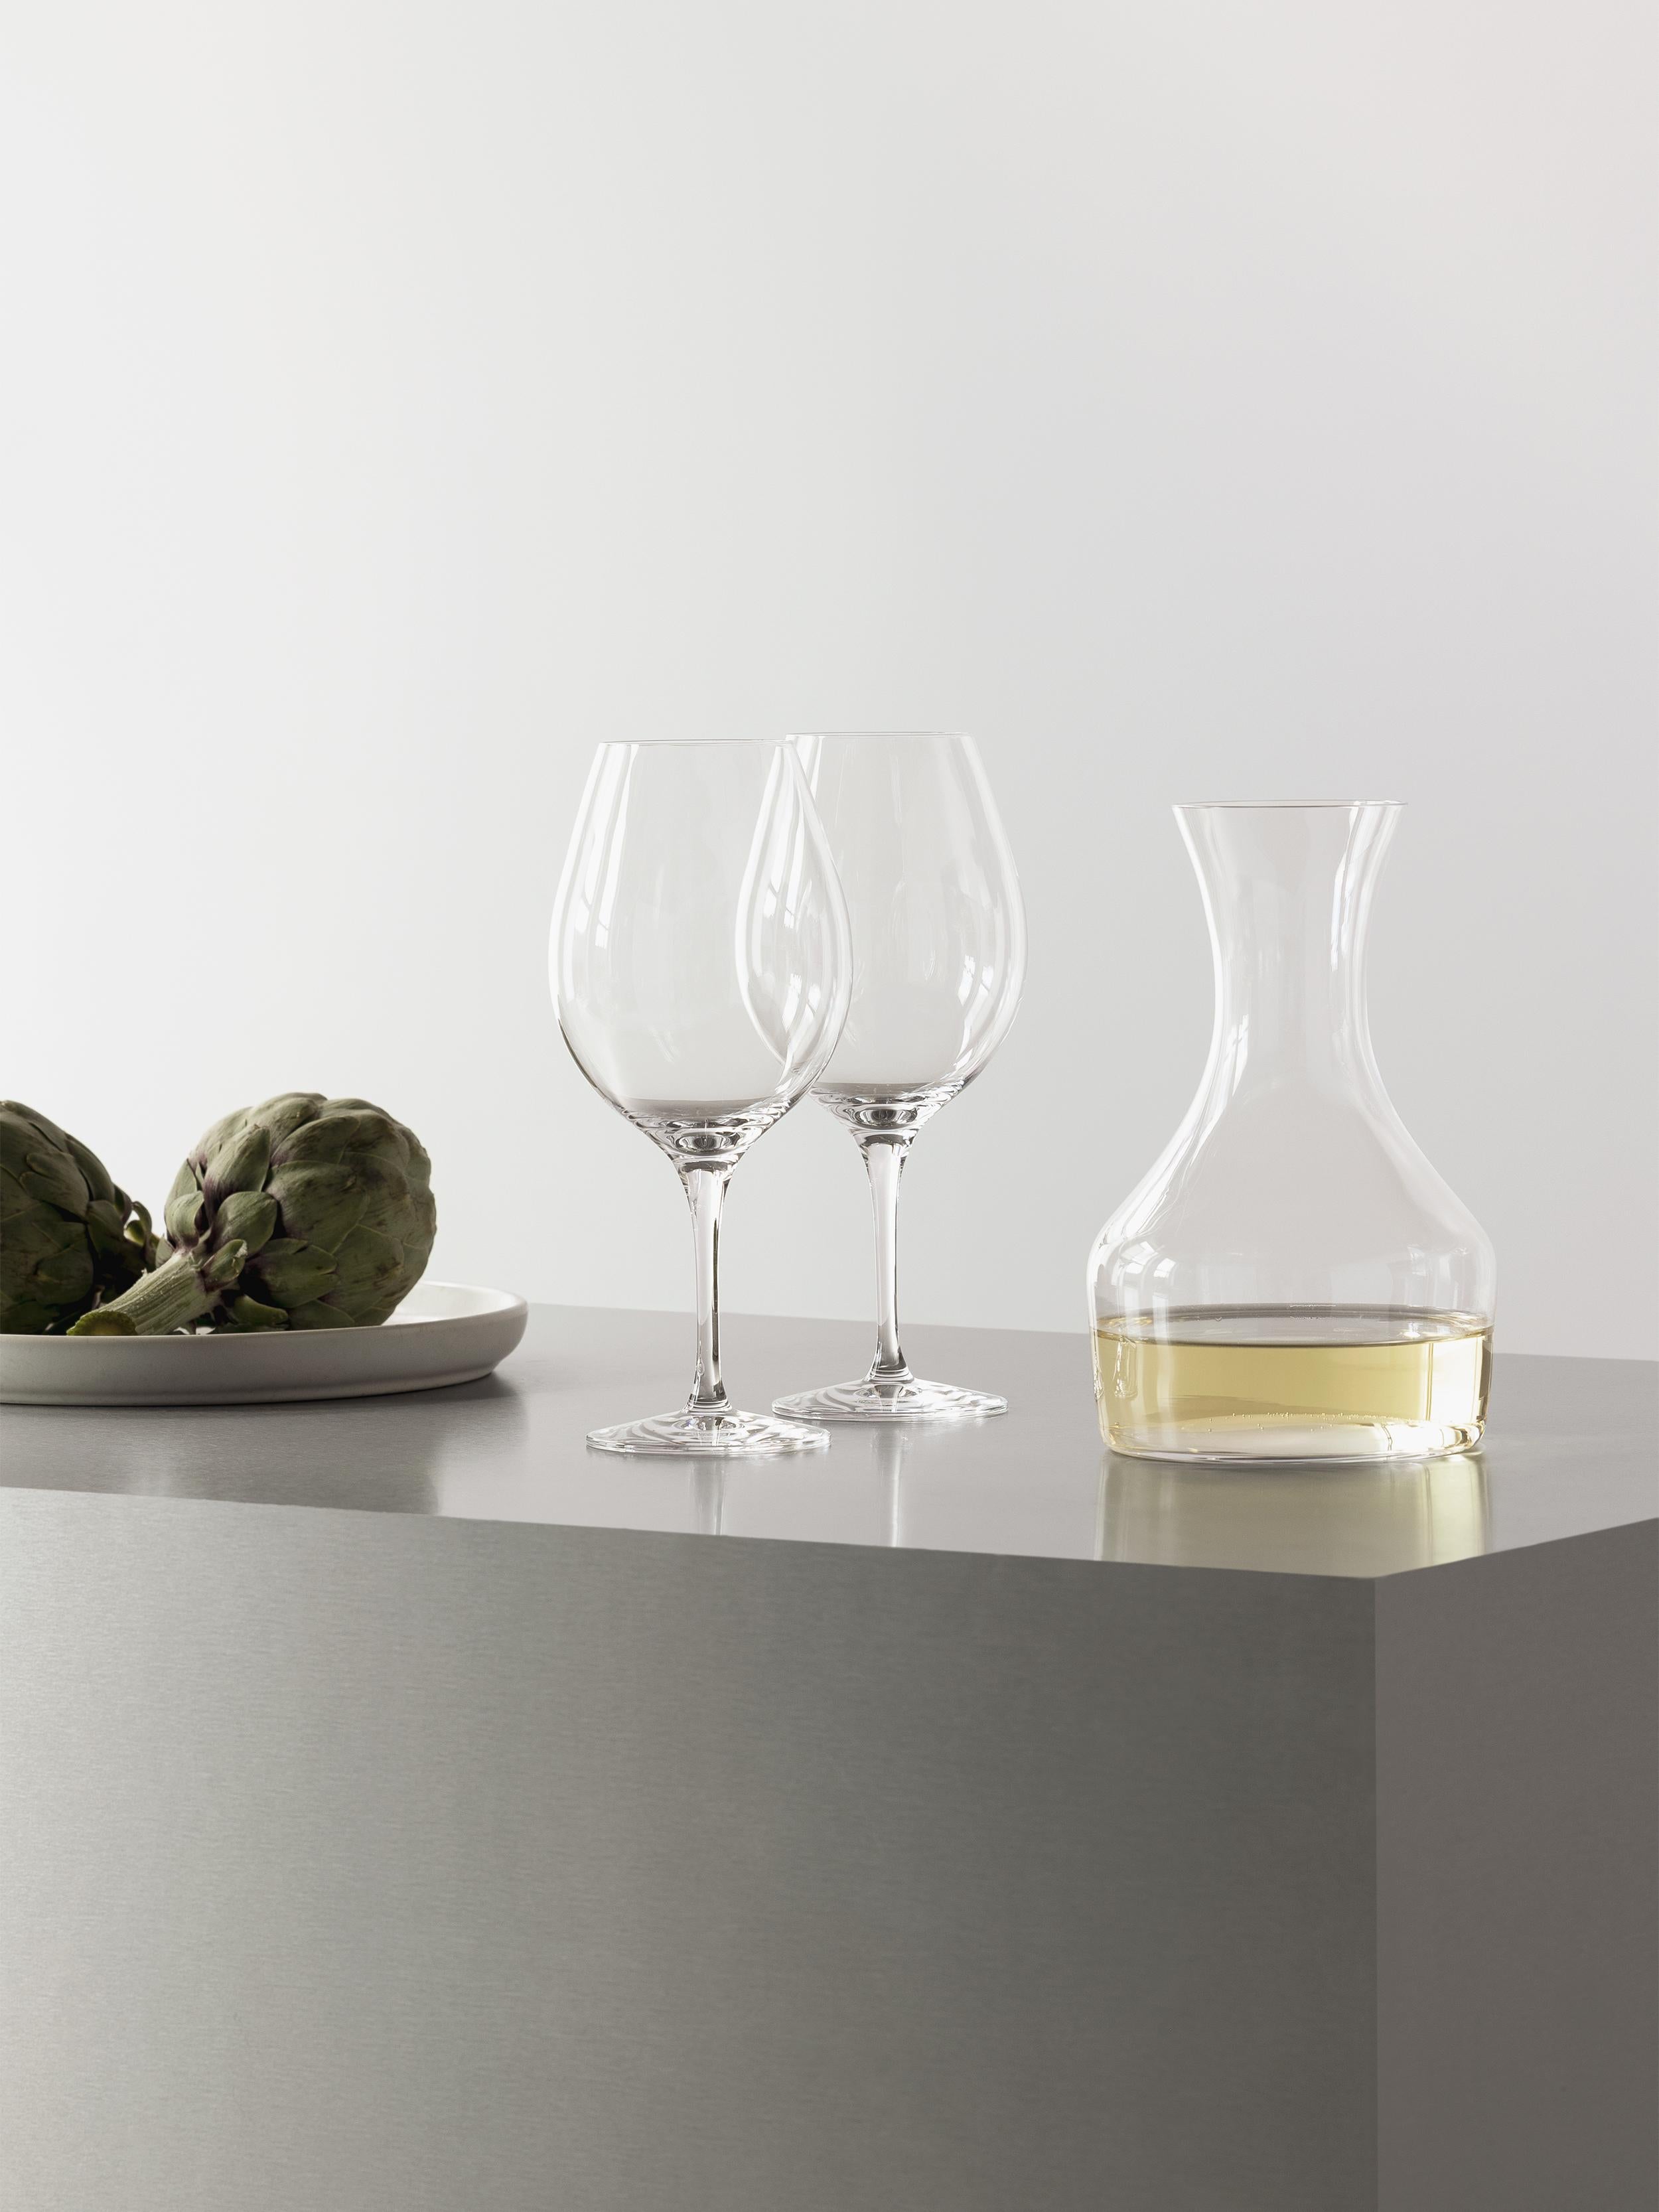 More XL from Orrefors, which holds 20 oz, is excellent for flavorful red wines. The large, tulip-shaped bowl allows the wine to breathe and develop in the glass, bringing out its aromas. Designed by Erika Lagerbielke.
